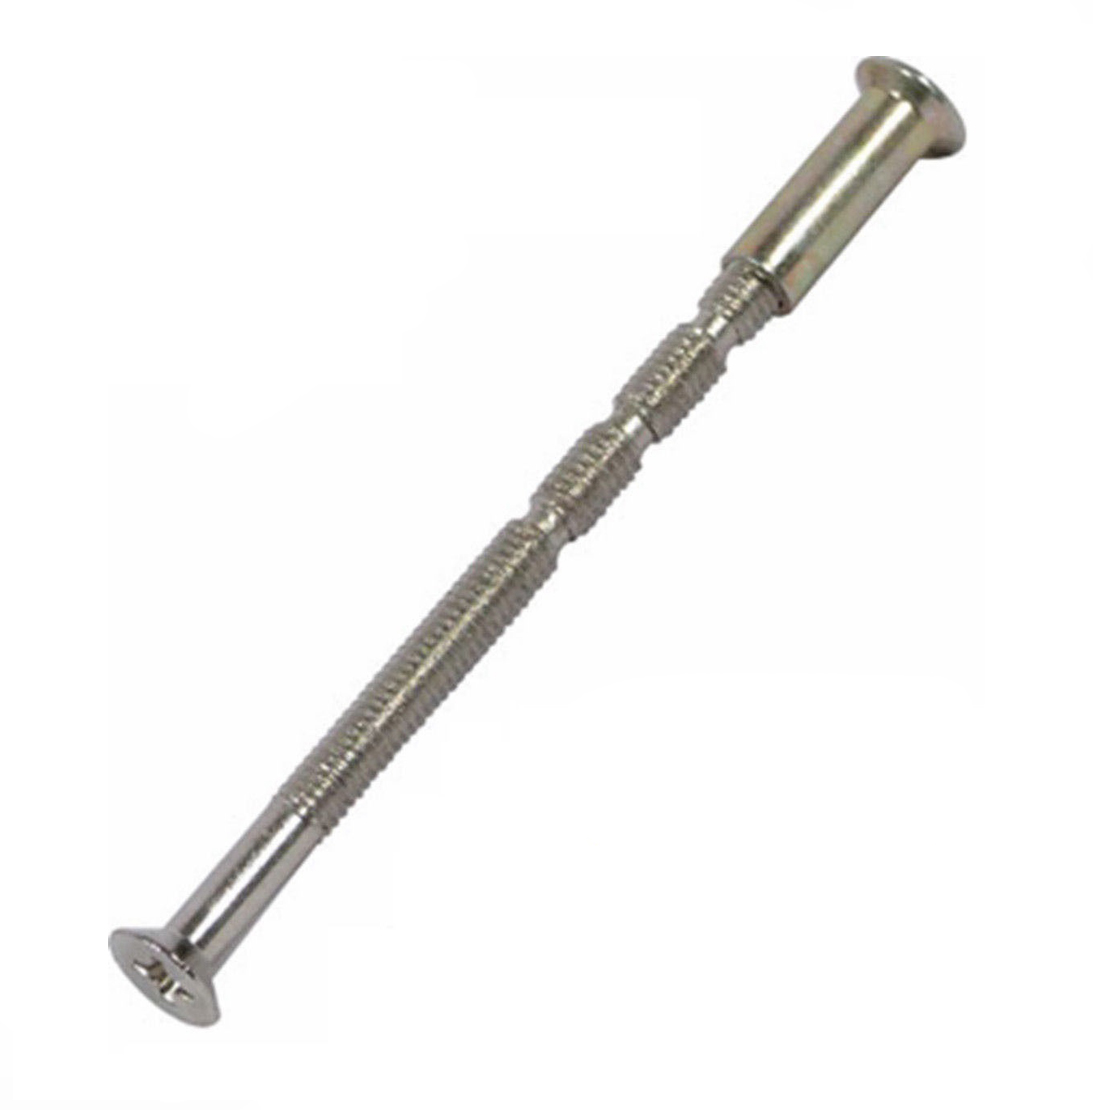 Connecting Bolts Screw with Sleeve - Fasteners Store